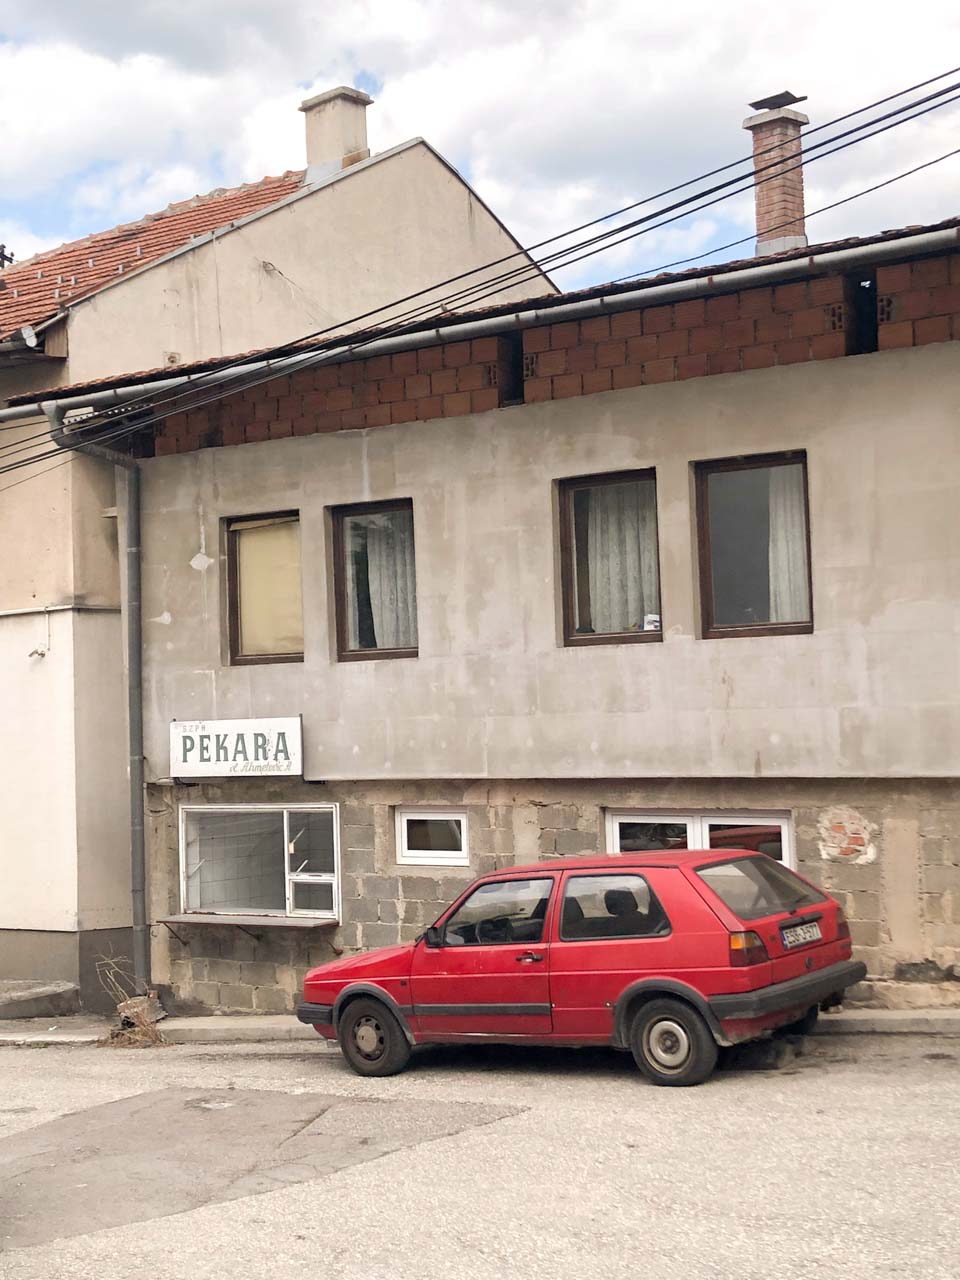 An old red car parked outside a bakery in Sarajevo